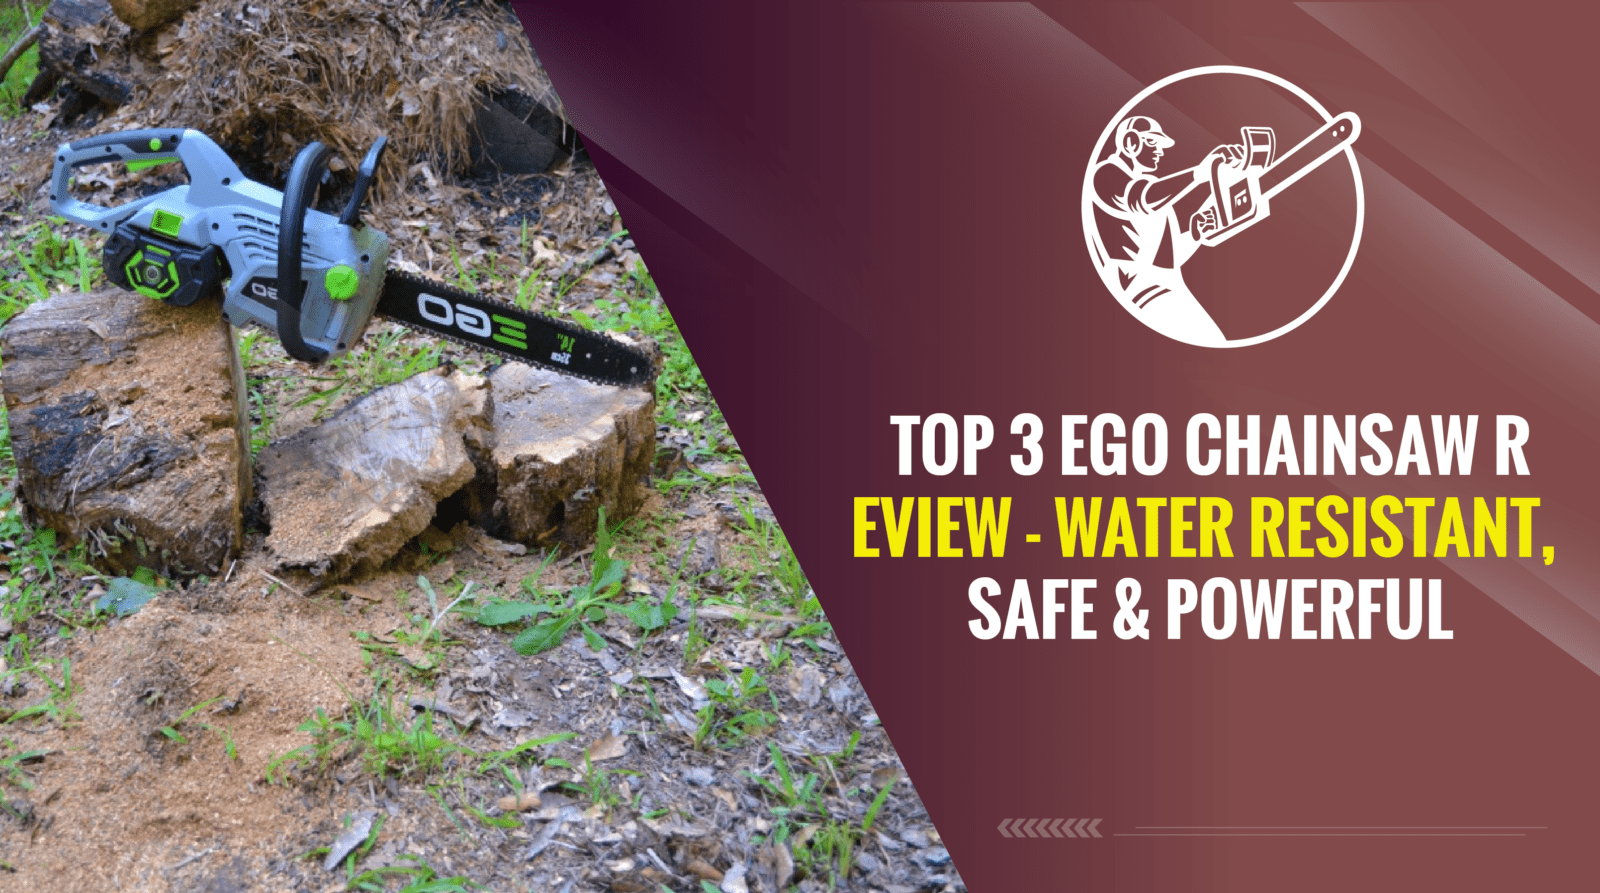 Top 3 Ego Chainsaw Review - Water Resistant, Safe & Powerful